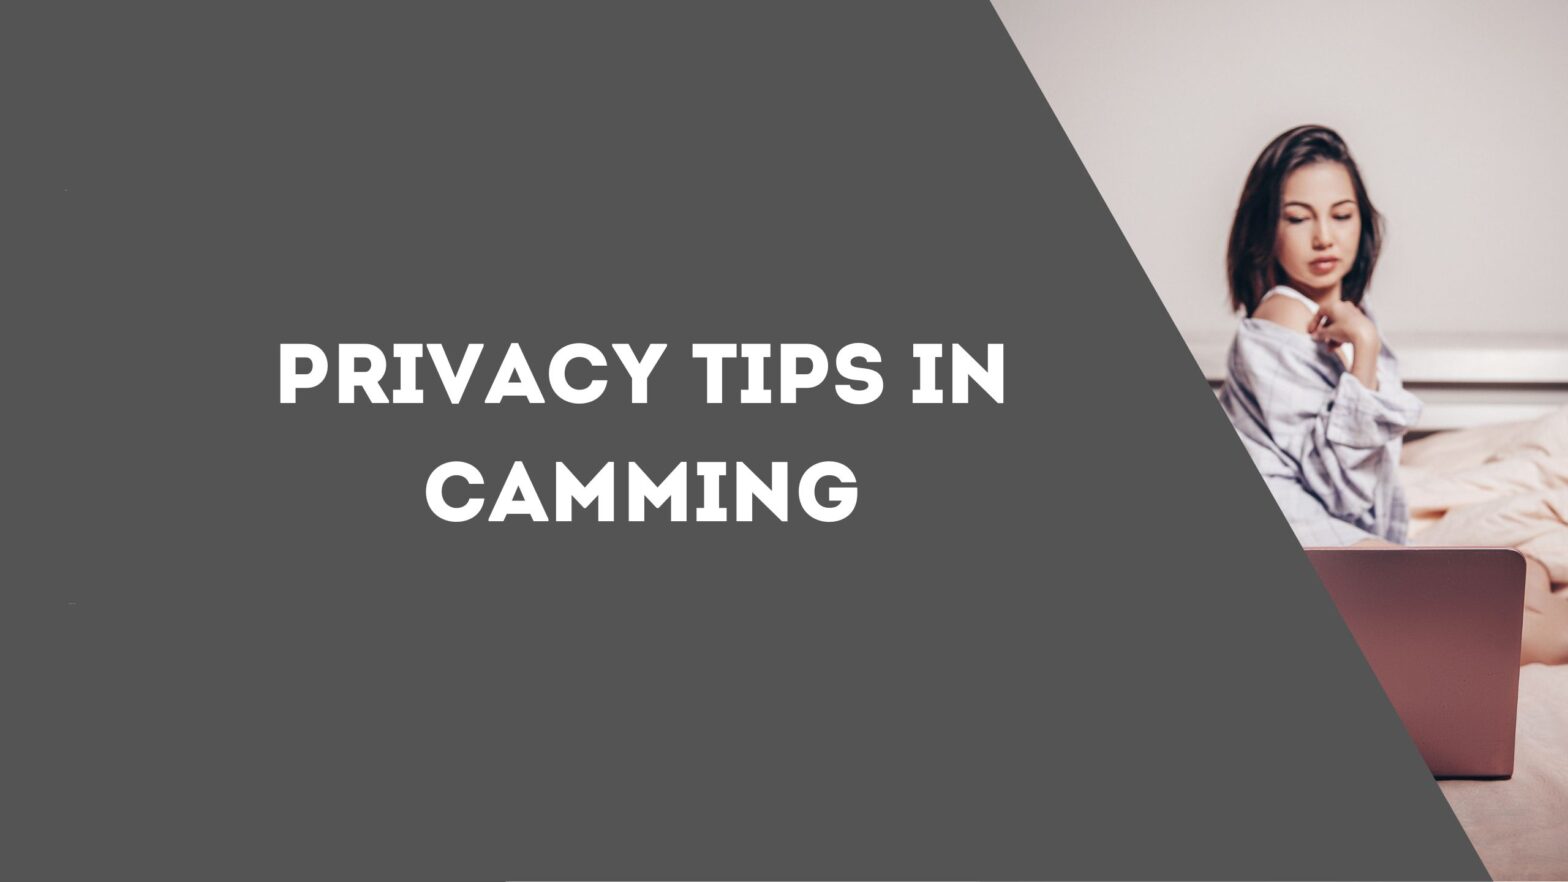 Privacy Tips in Camming